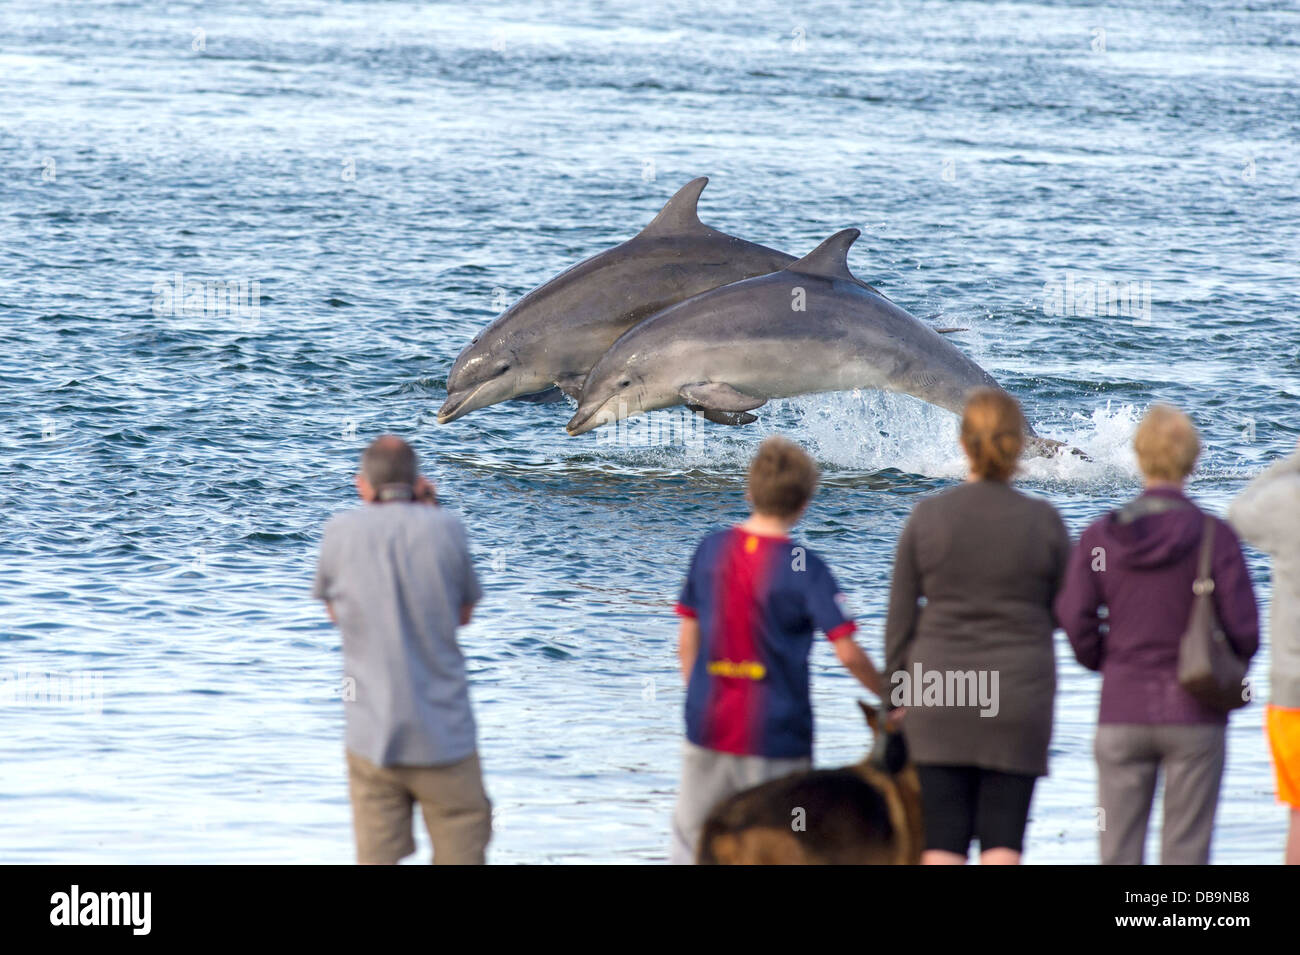 People watching common bottle nosed dolphins breaching, Chanonry Point, Moray firth, Scotland, UK Stock Photo